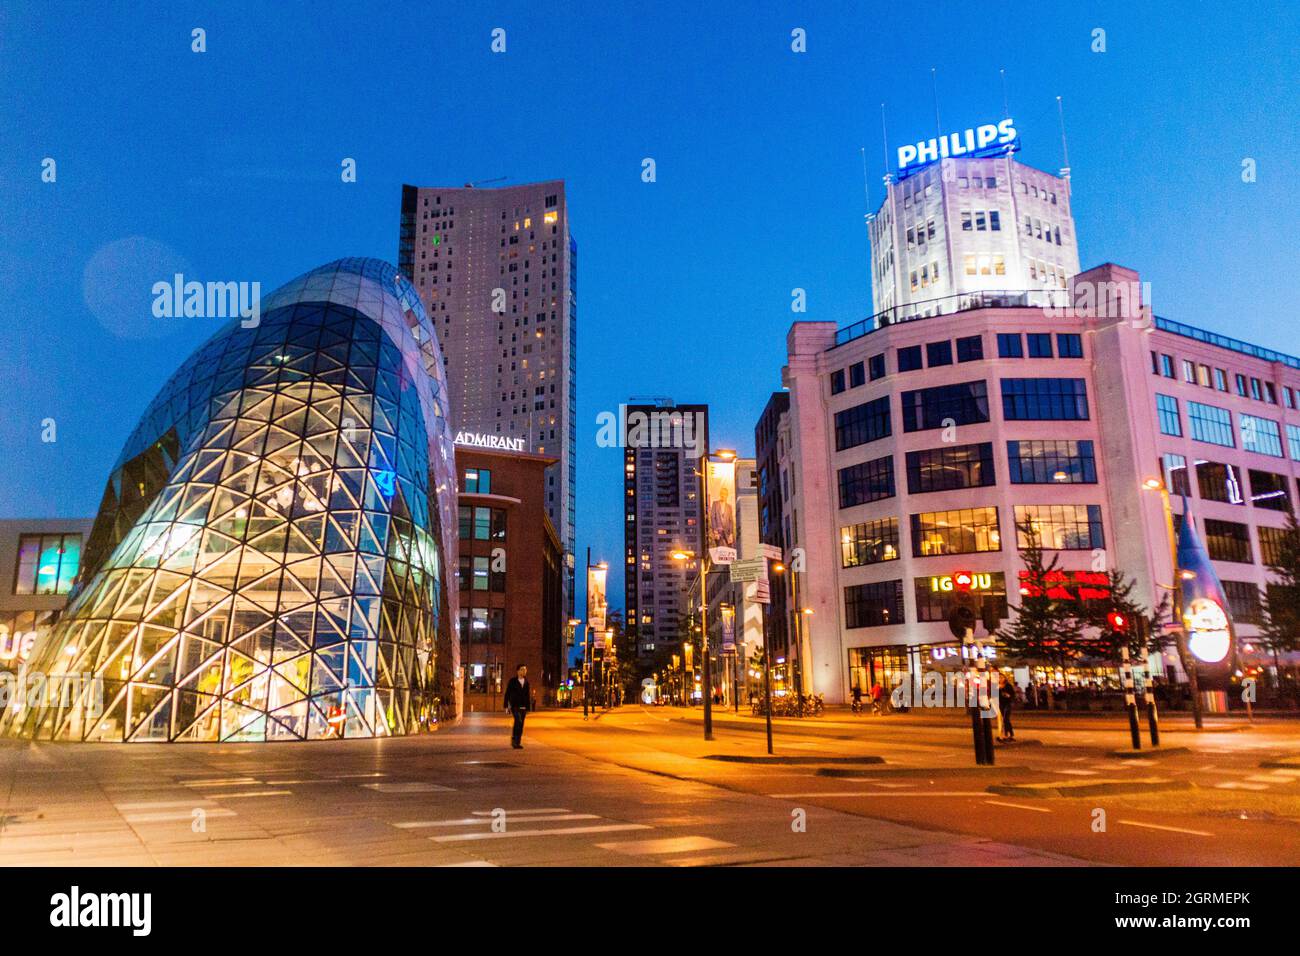 Philips Building Eindhoven City Centre High Resolution Stock Photography  and Images - Alamy